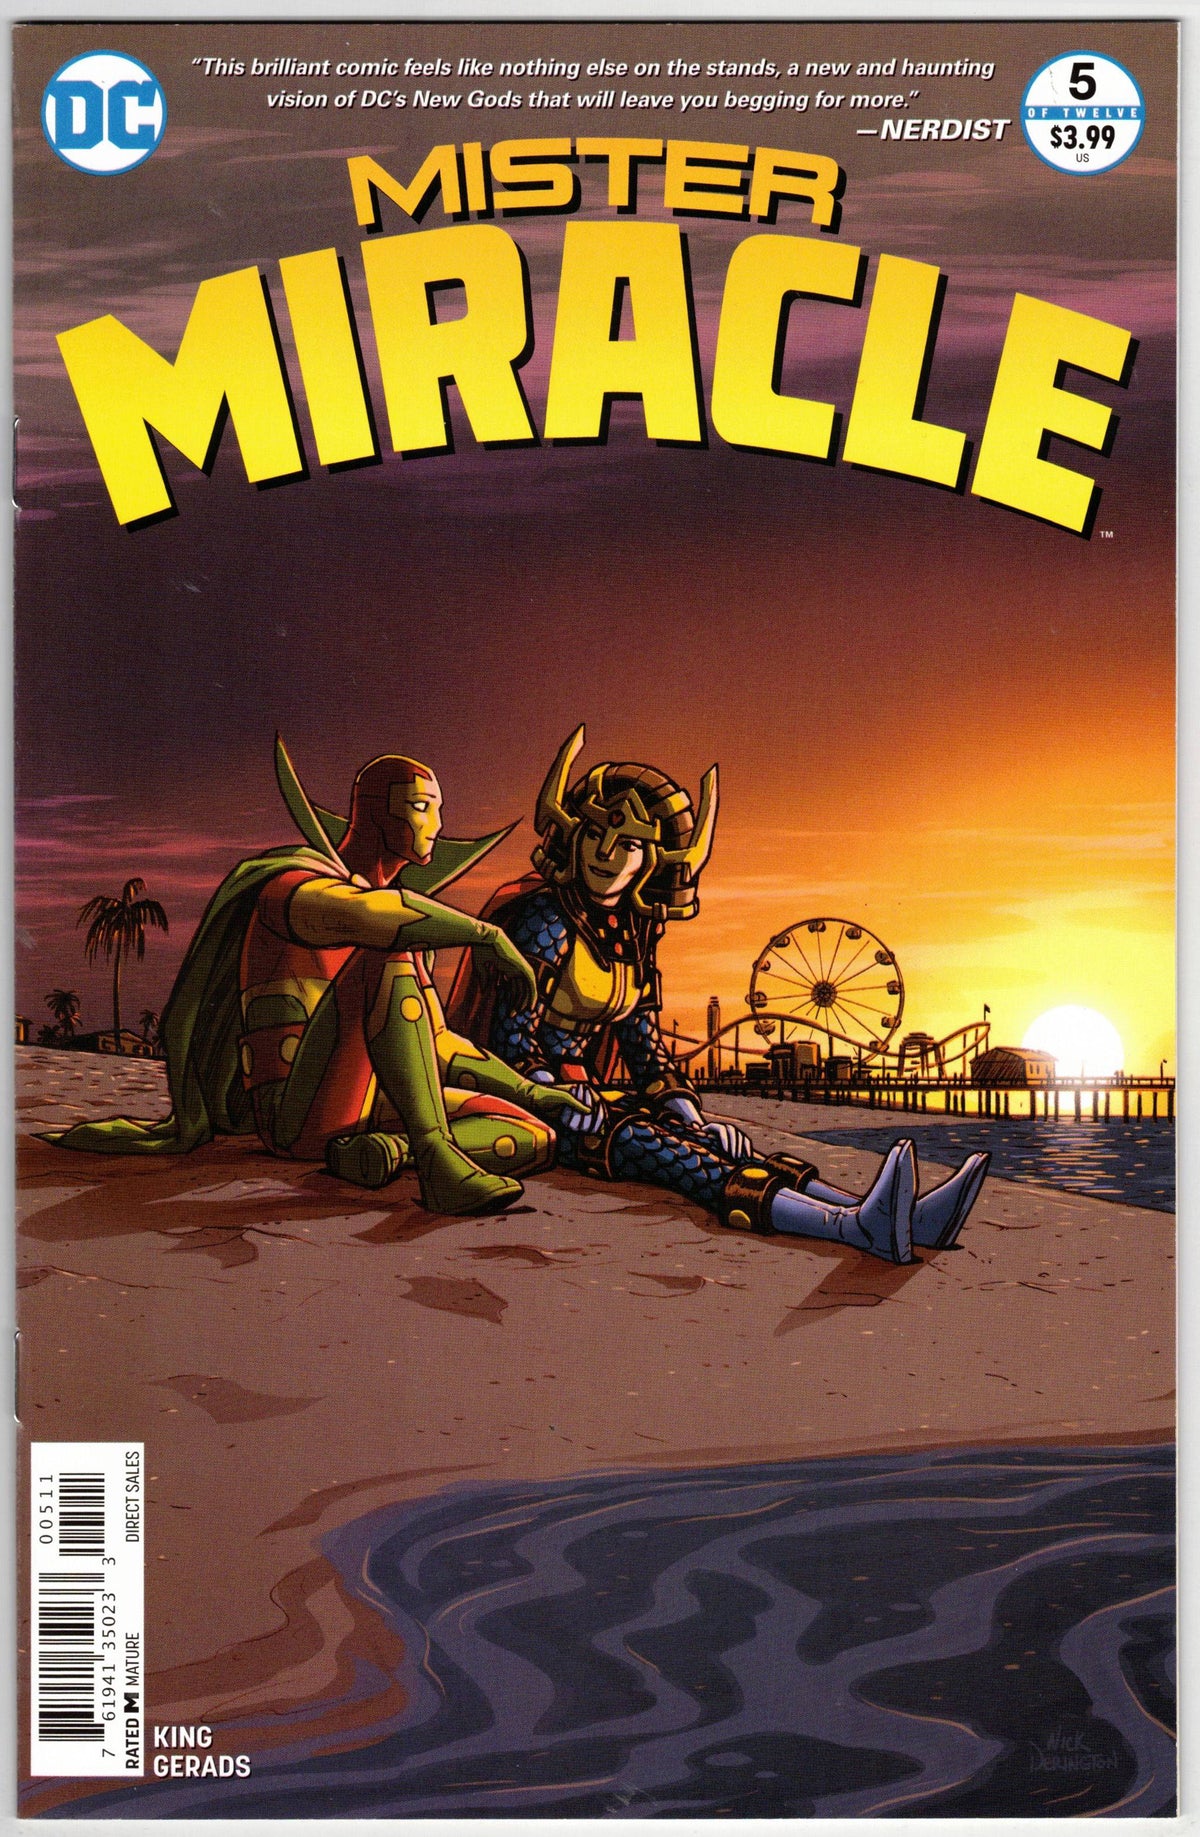 Photo of Mister Miracle, Vol. 4 (2017) Issue 5A - Near Mint Comic sold by Stronghold Collectibles